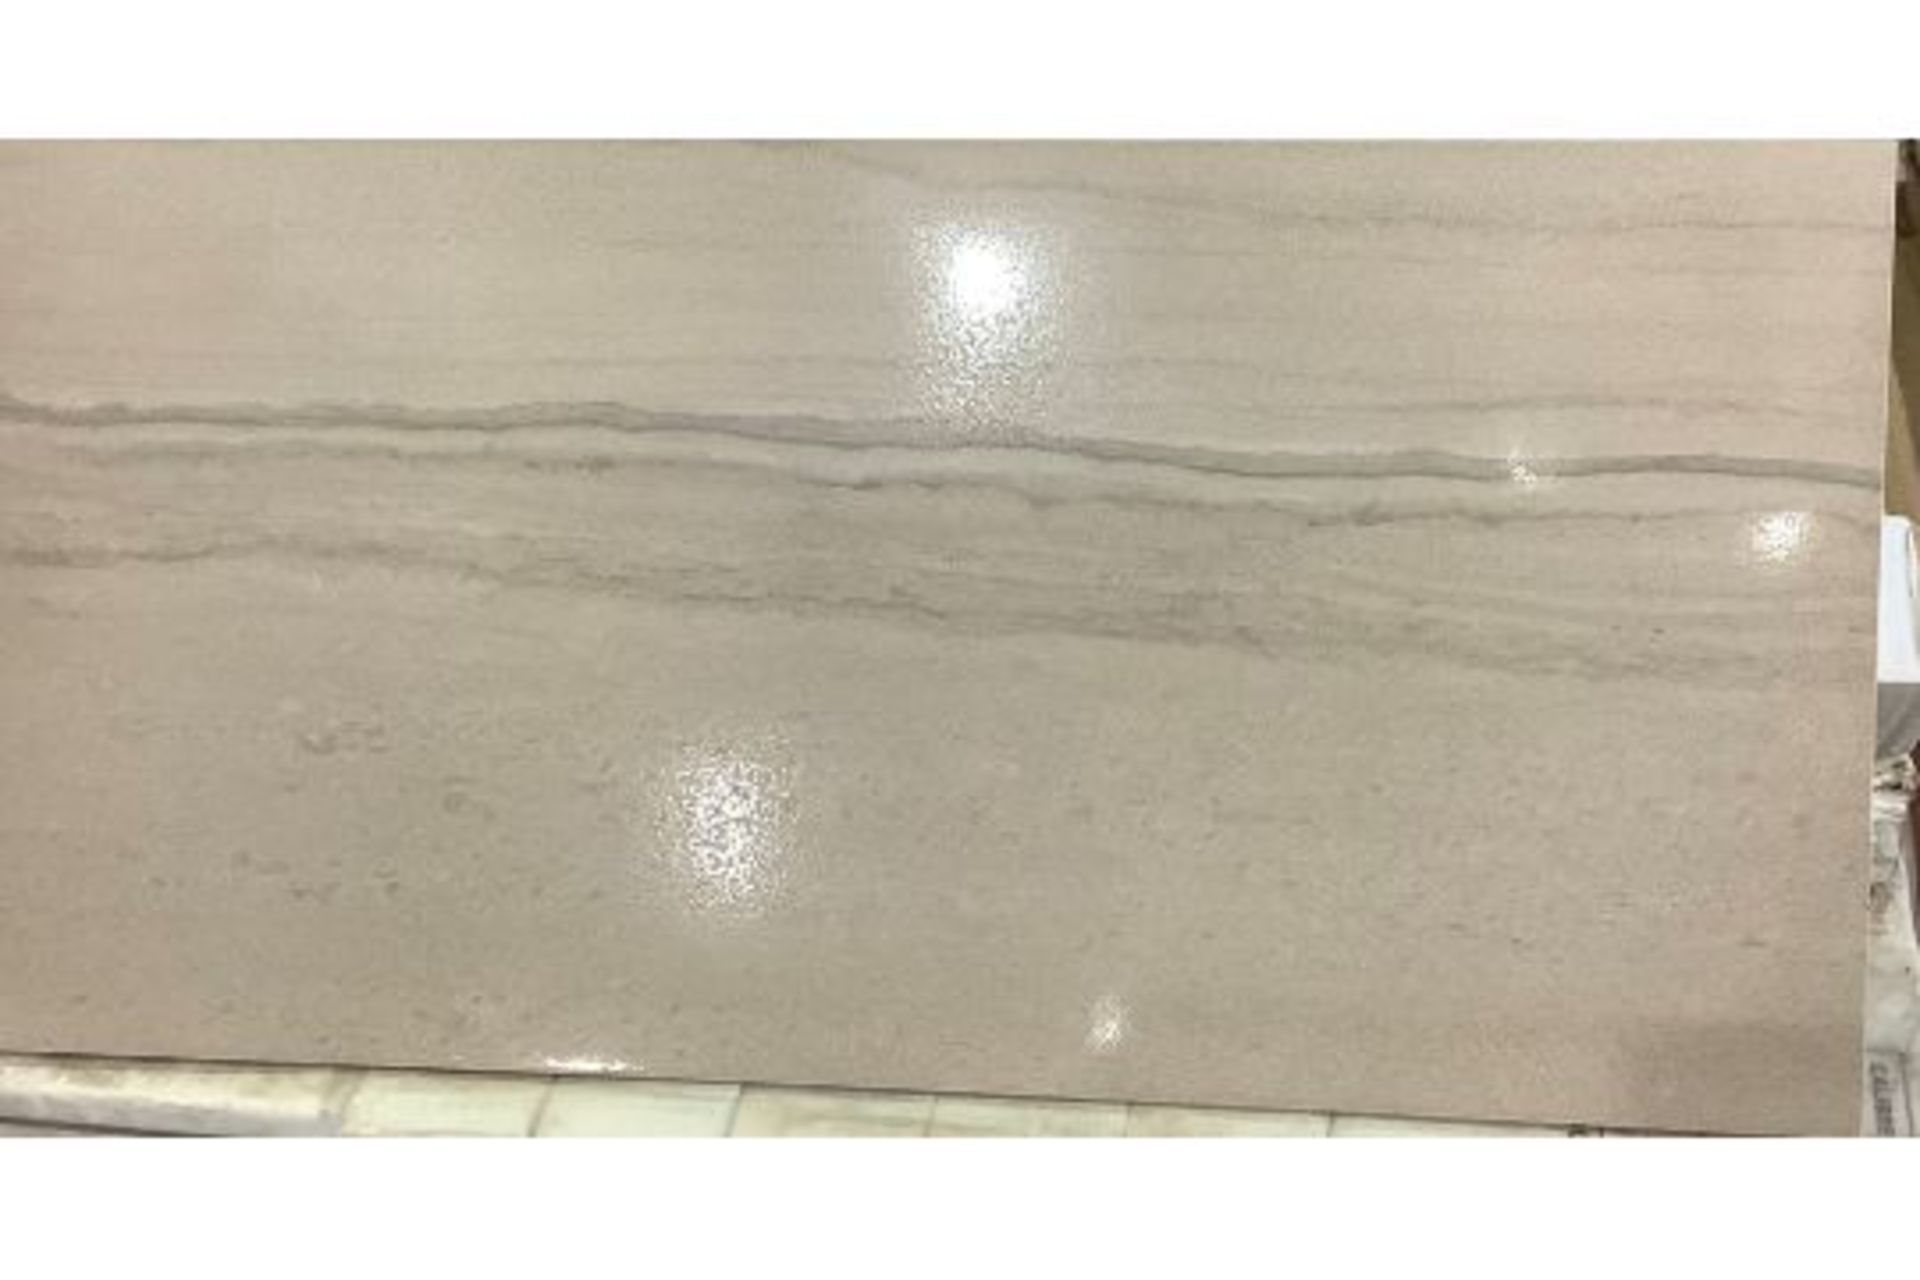 NEW 8.64m2 Bloomsbury Brook Edge Lapatto Rock Wall and Floor Tiles. 300x600mm per tile, 8.3mm ... - Image 2 of 2